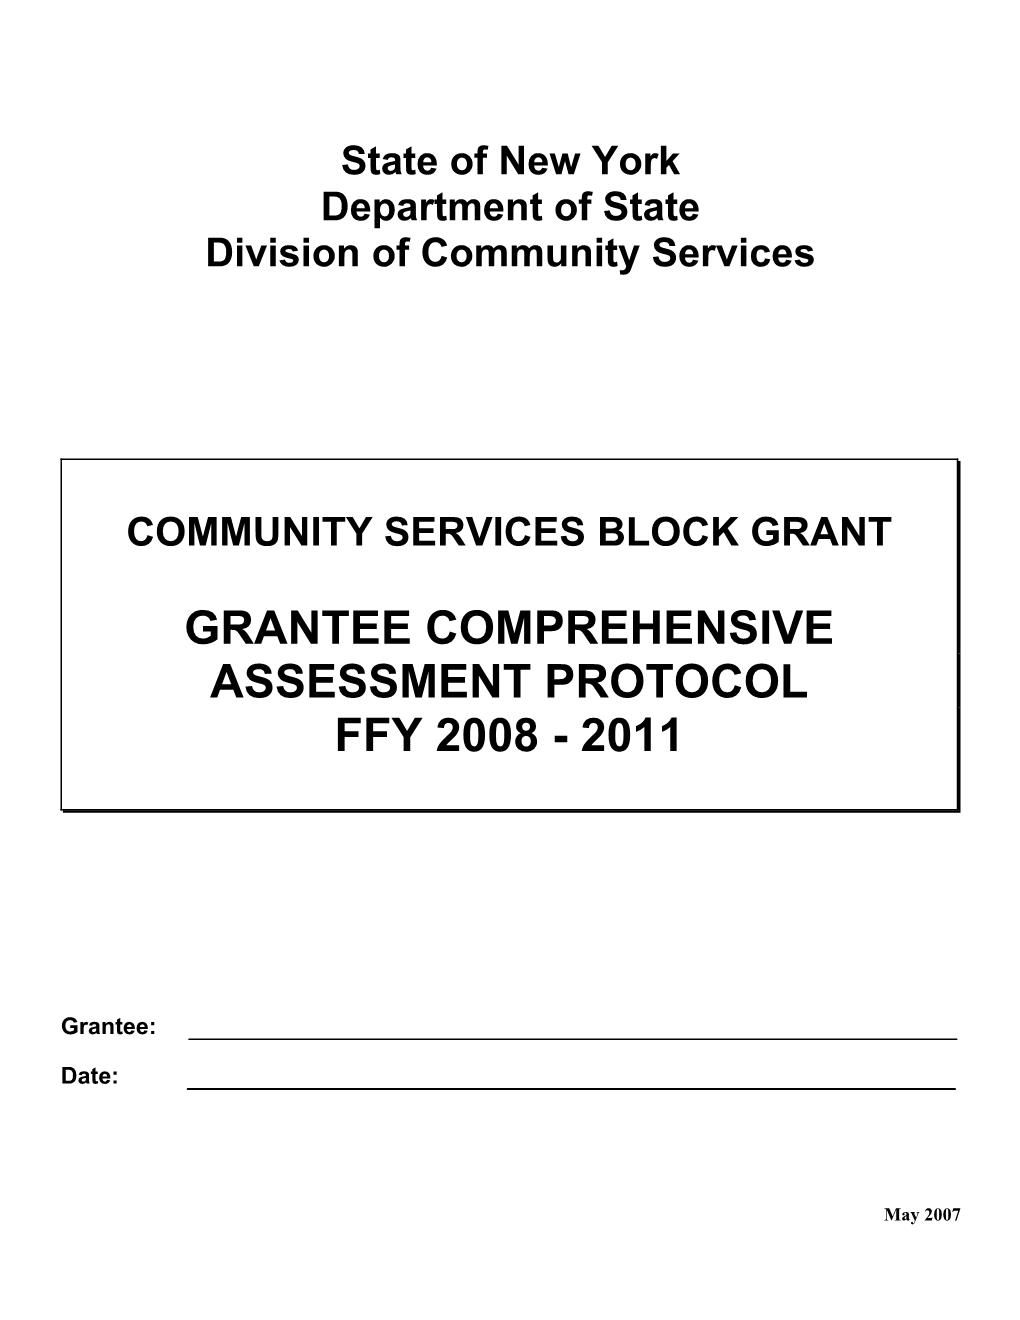 Grantee Comprehensive Assessment Protocol - Outline/Layout Suggestions